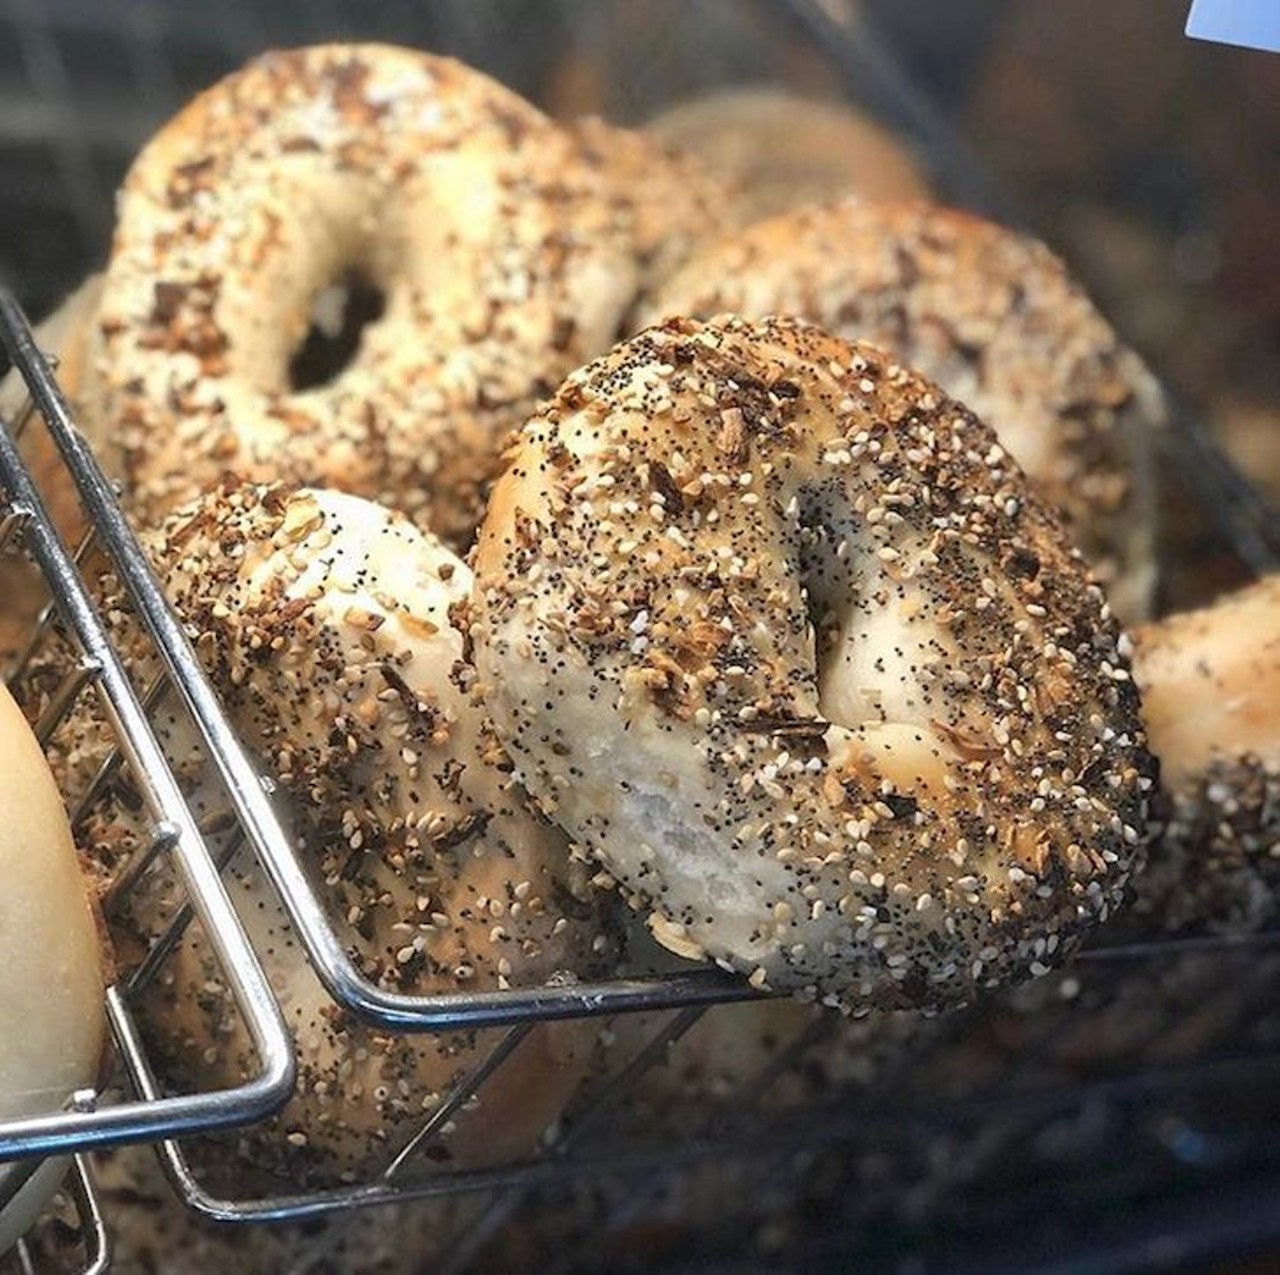 Bagel King
1455 Semoran Blvd., Casselberry, (407) 657-6266
Home to kettle-baked bagel, the finished product has a crunchy exterior with a deliciously soft inside, made to perfection. With an array of bagel flavors and both sweet and savory schmears, you&#146;d think these masterpieces came straight out of New York. 
Photo via bagelking_fl/Facebook